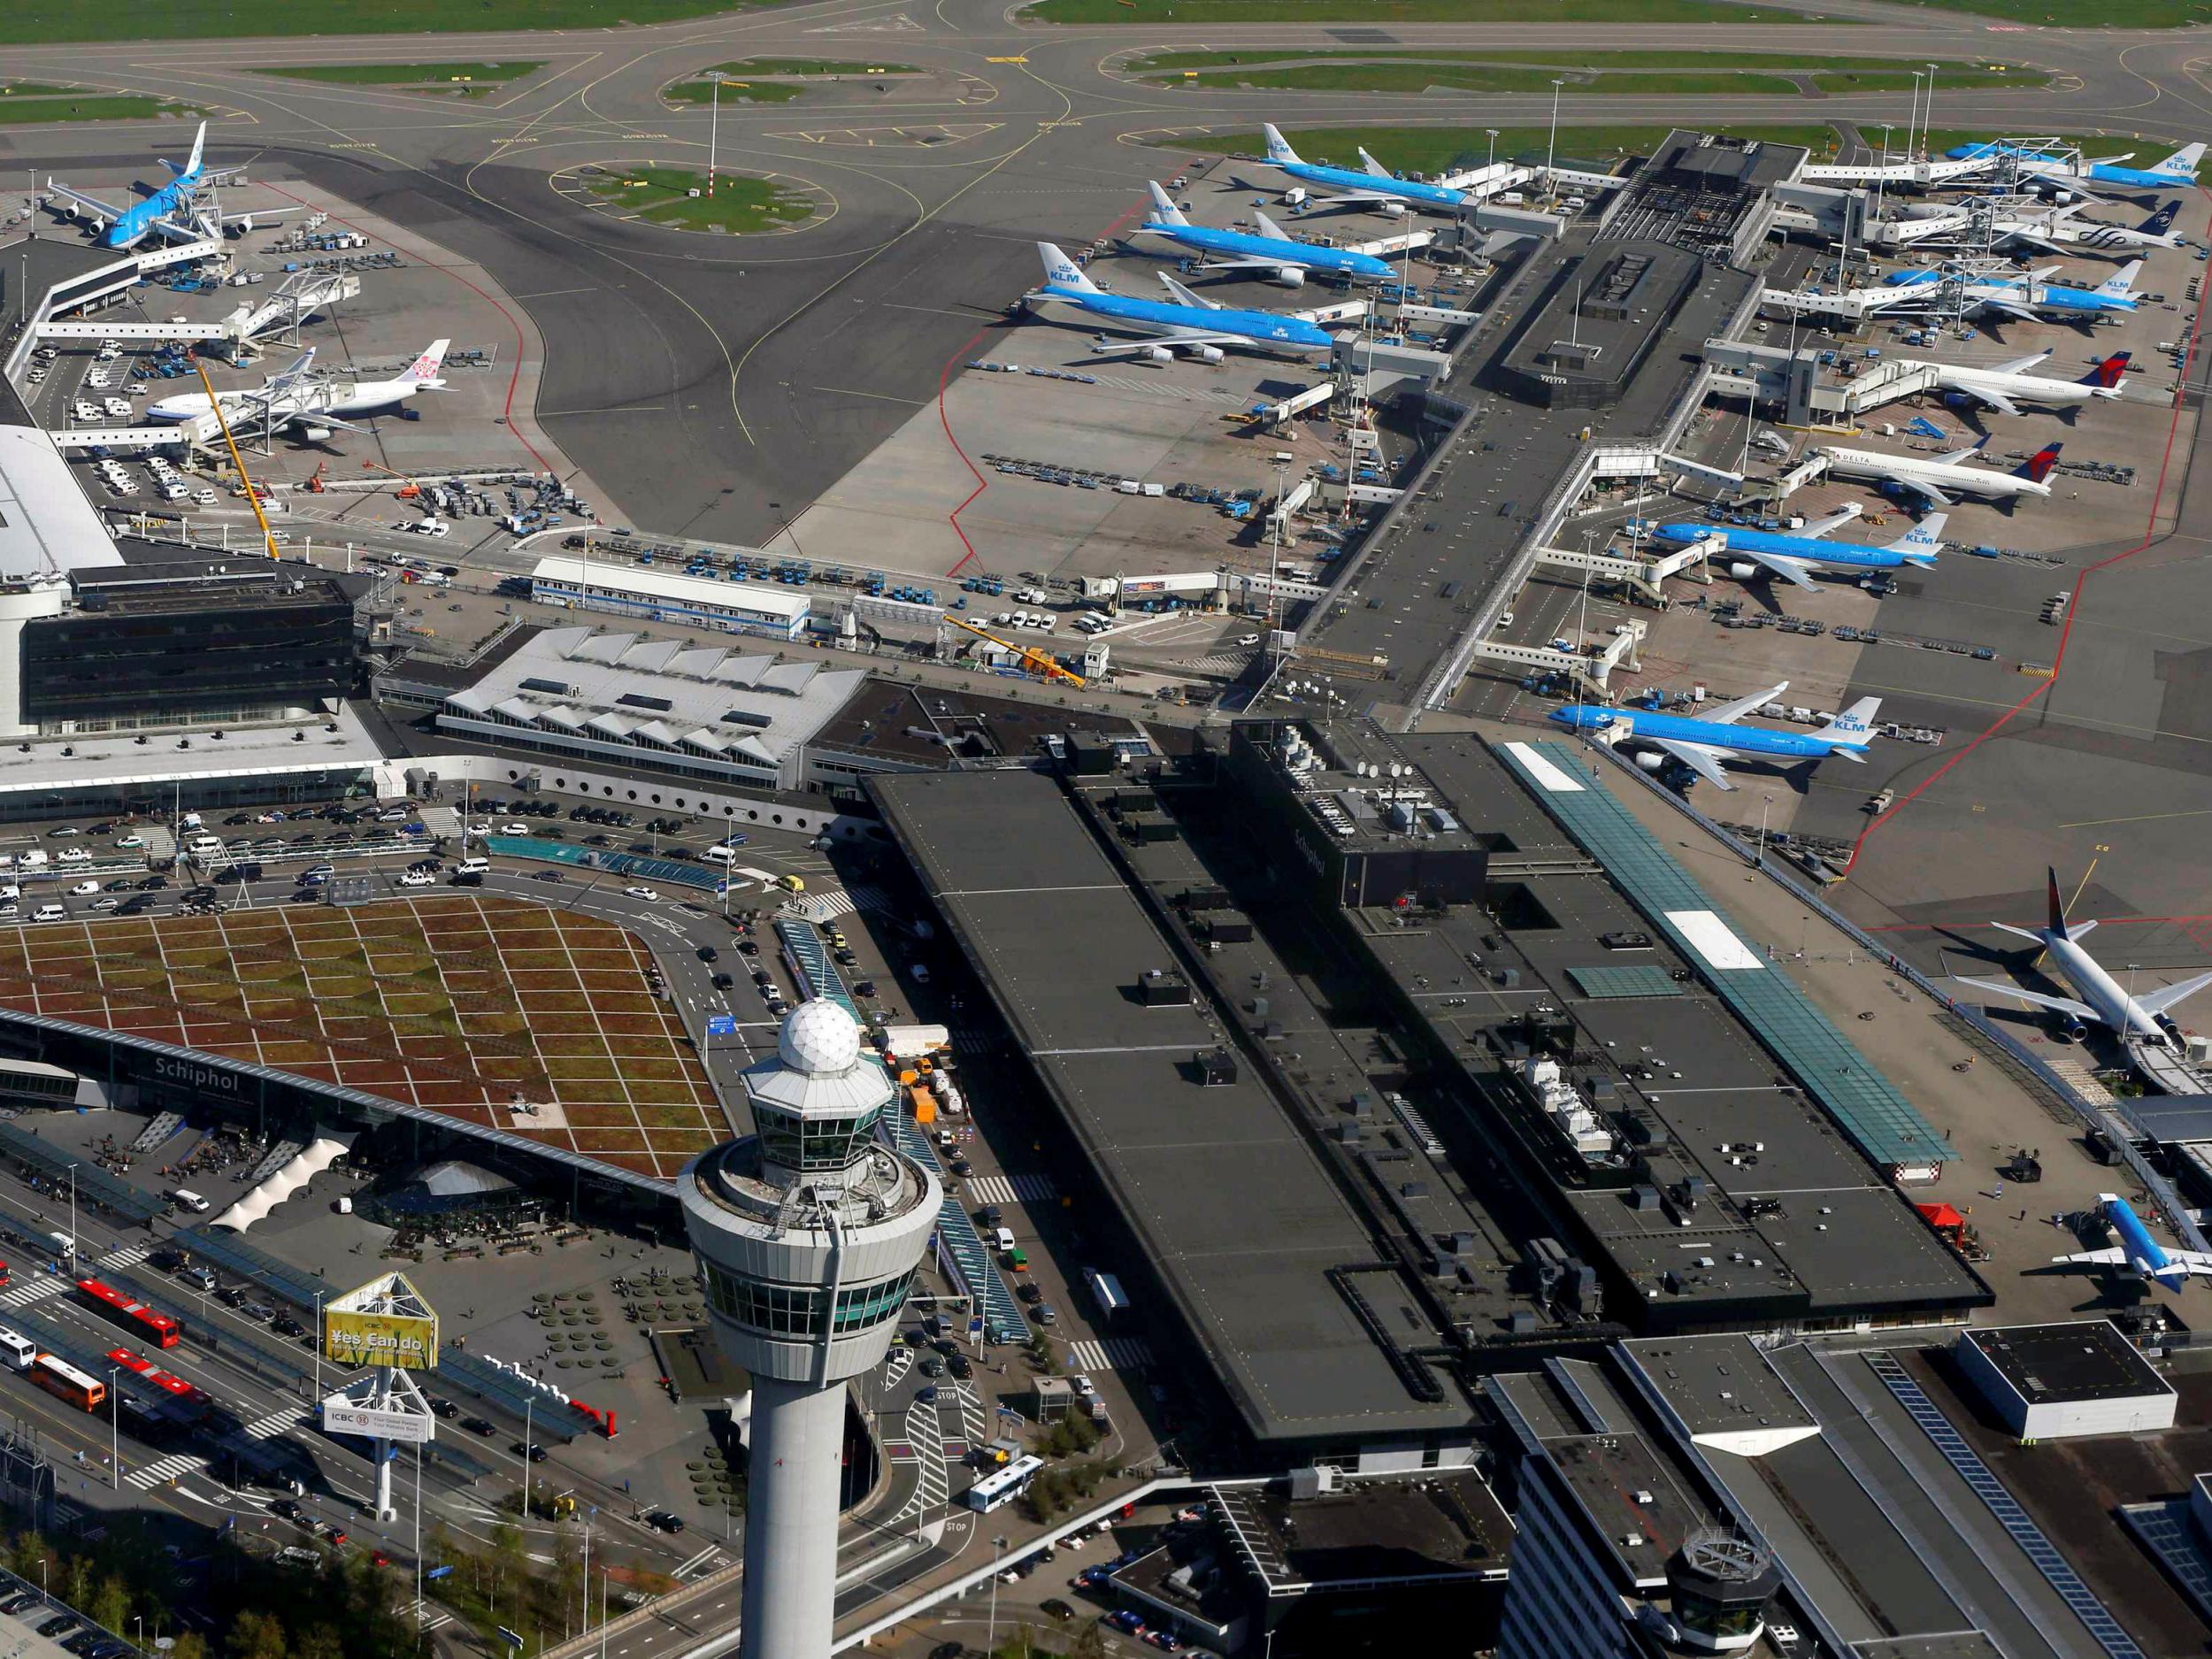 Amsterdam airport cancels all flights due to severe storms The